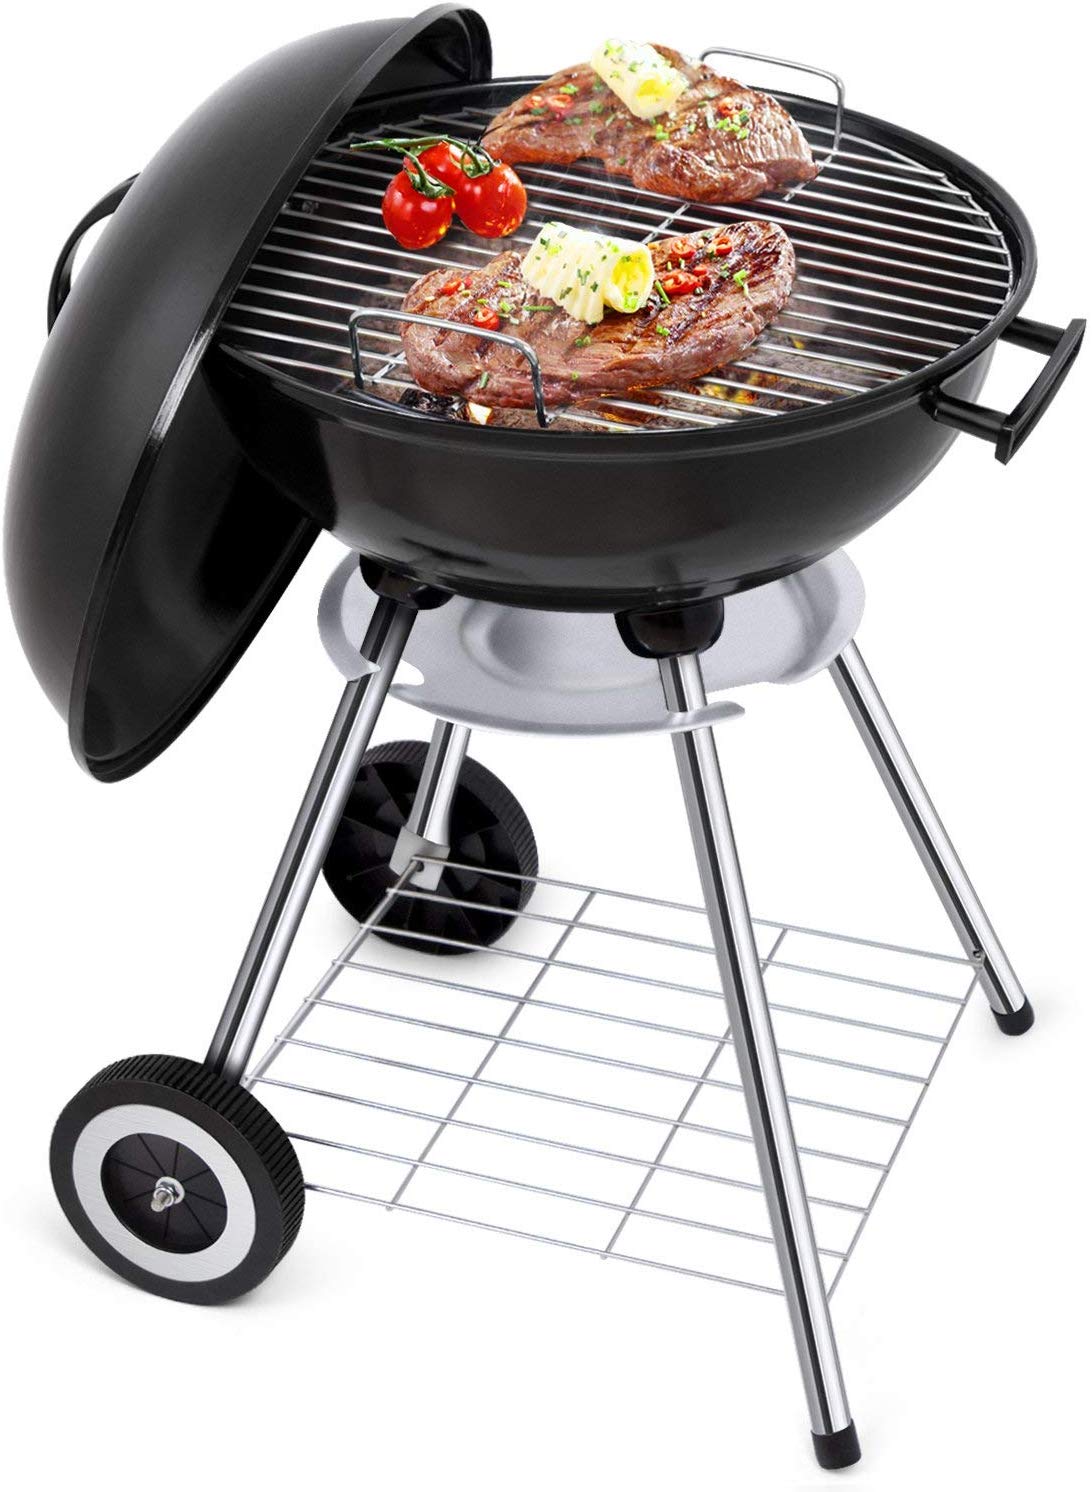 Portable Charcoal Grill for Outdoor Grilling - 71HX4NJli0L. AC SL1500 